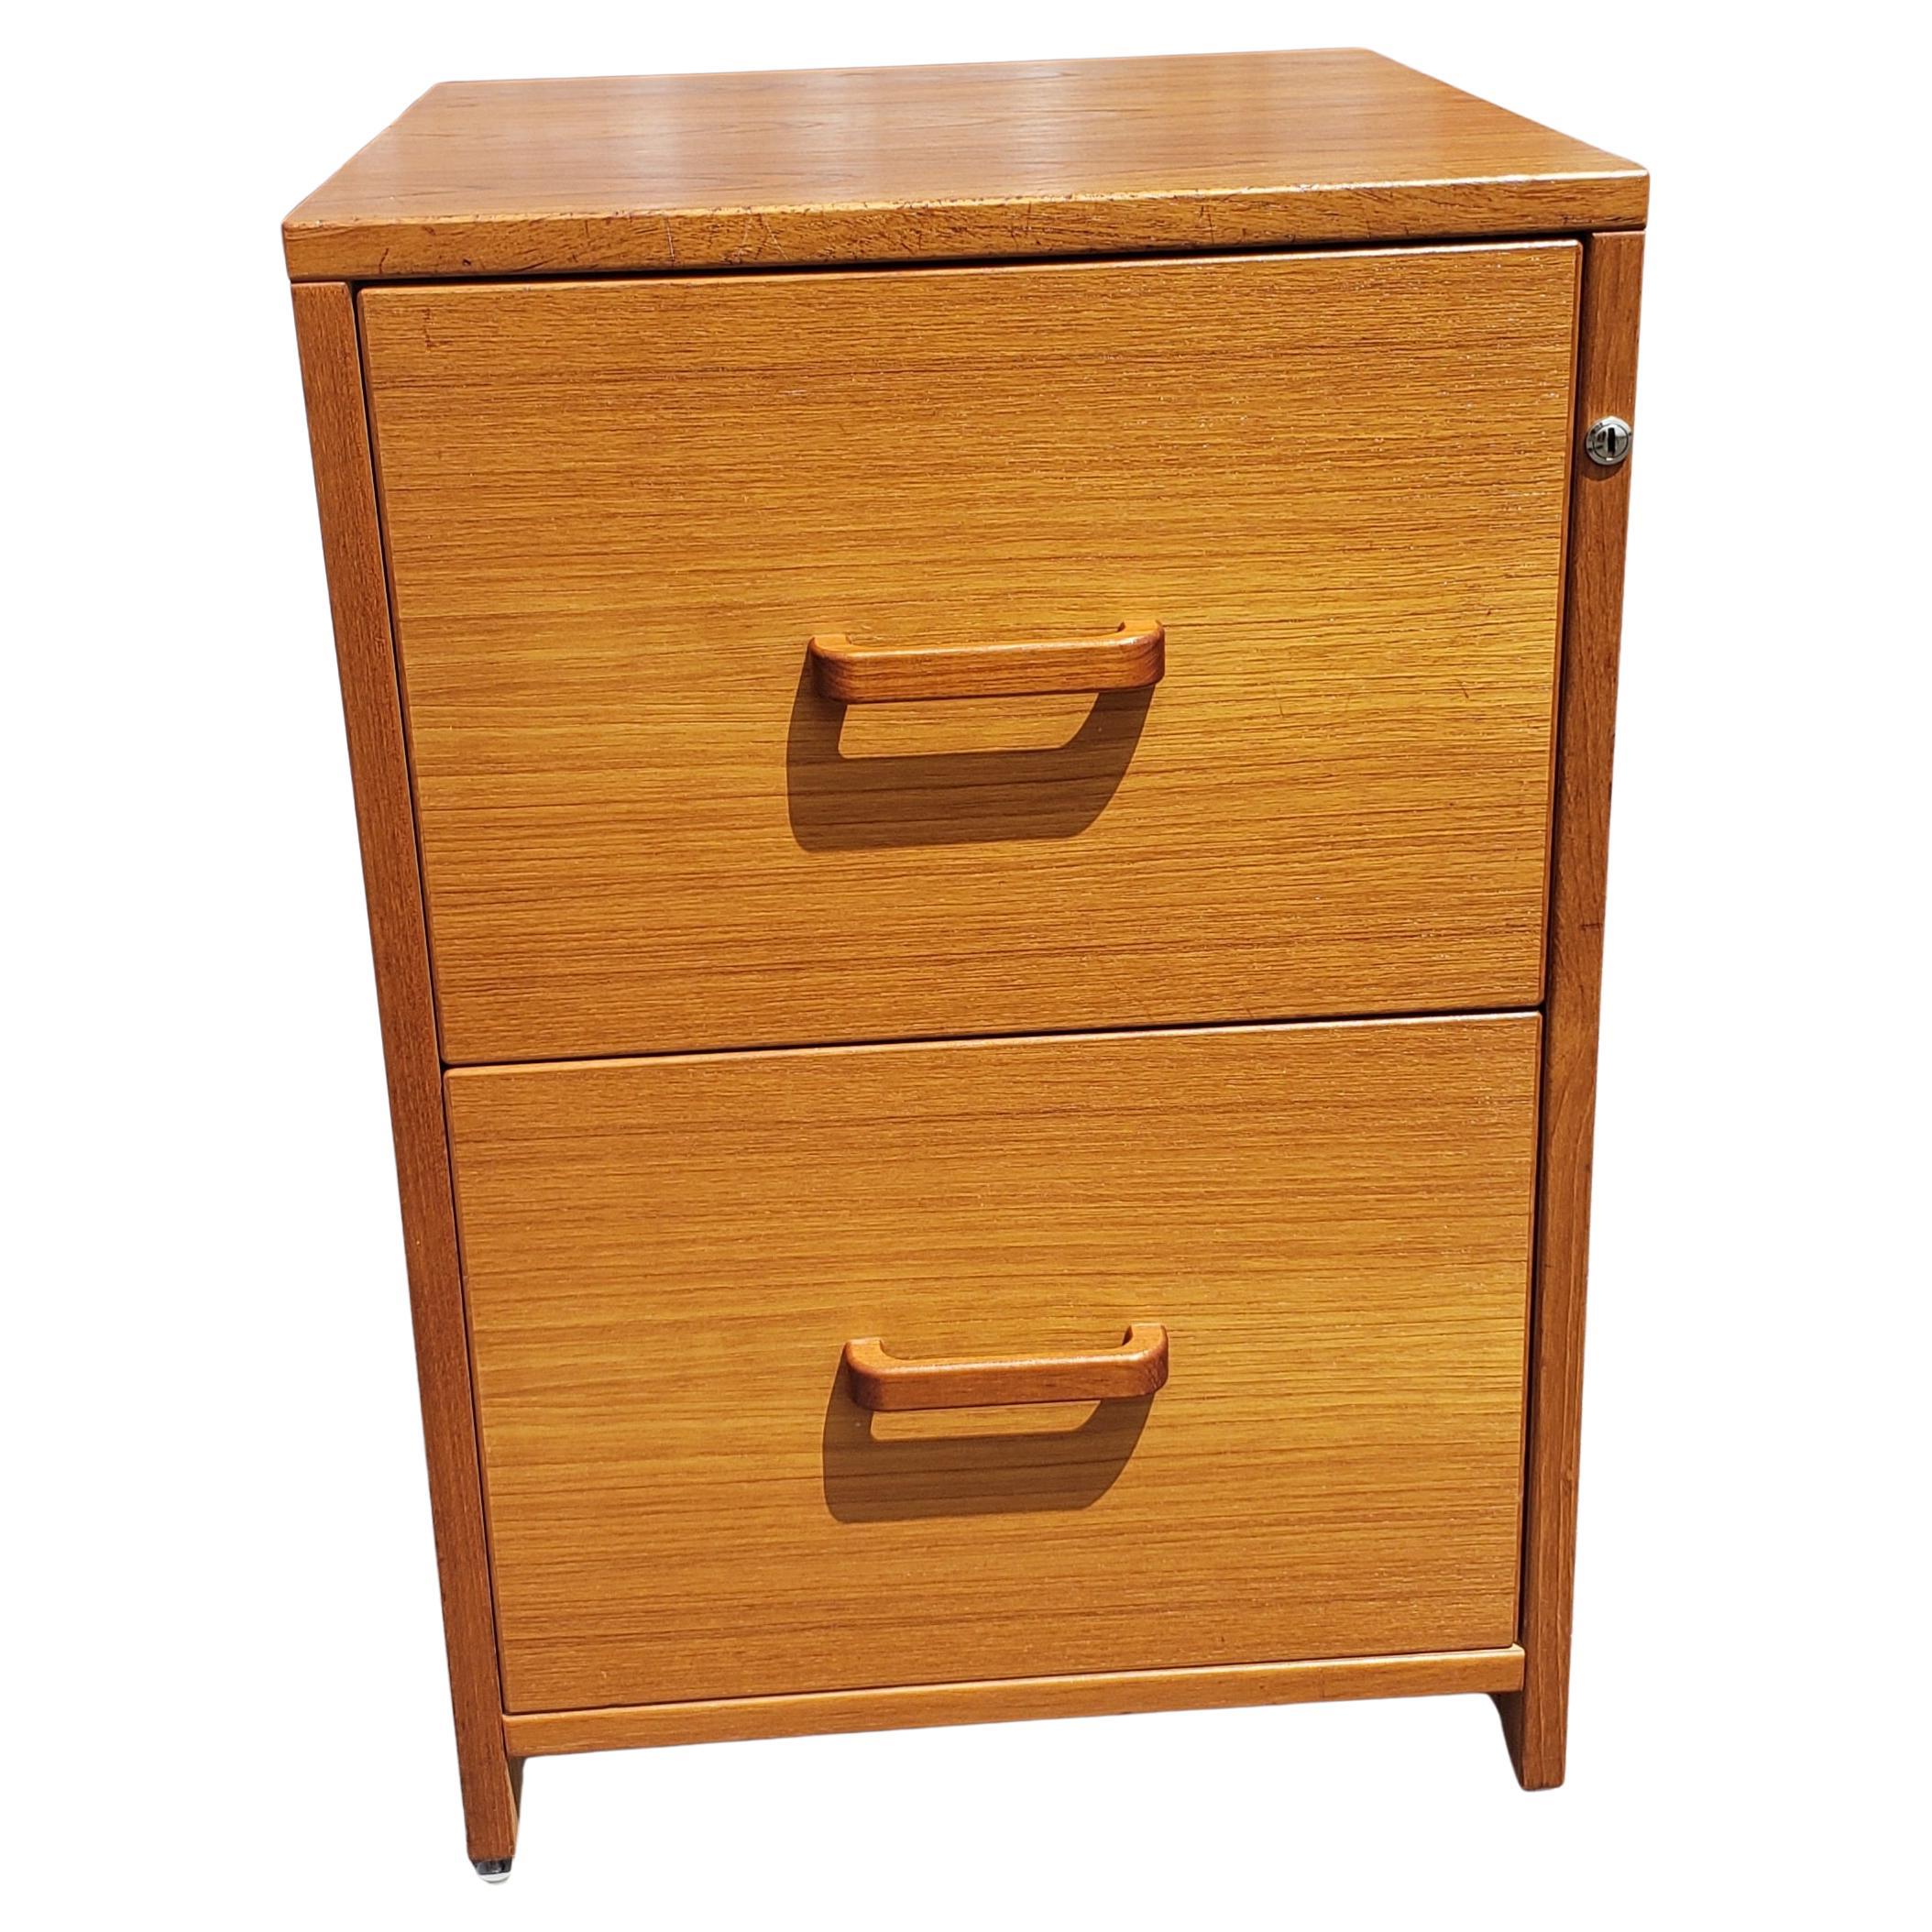 For your consideration sideration is this clean two-drawer teak filing cabinet on wheels. Build in files hanging rail with adjustable separators for legal as well letter size folders. Clean in and out. Very smooth drawers closing and opening.